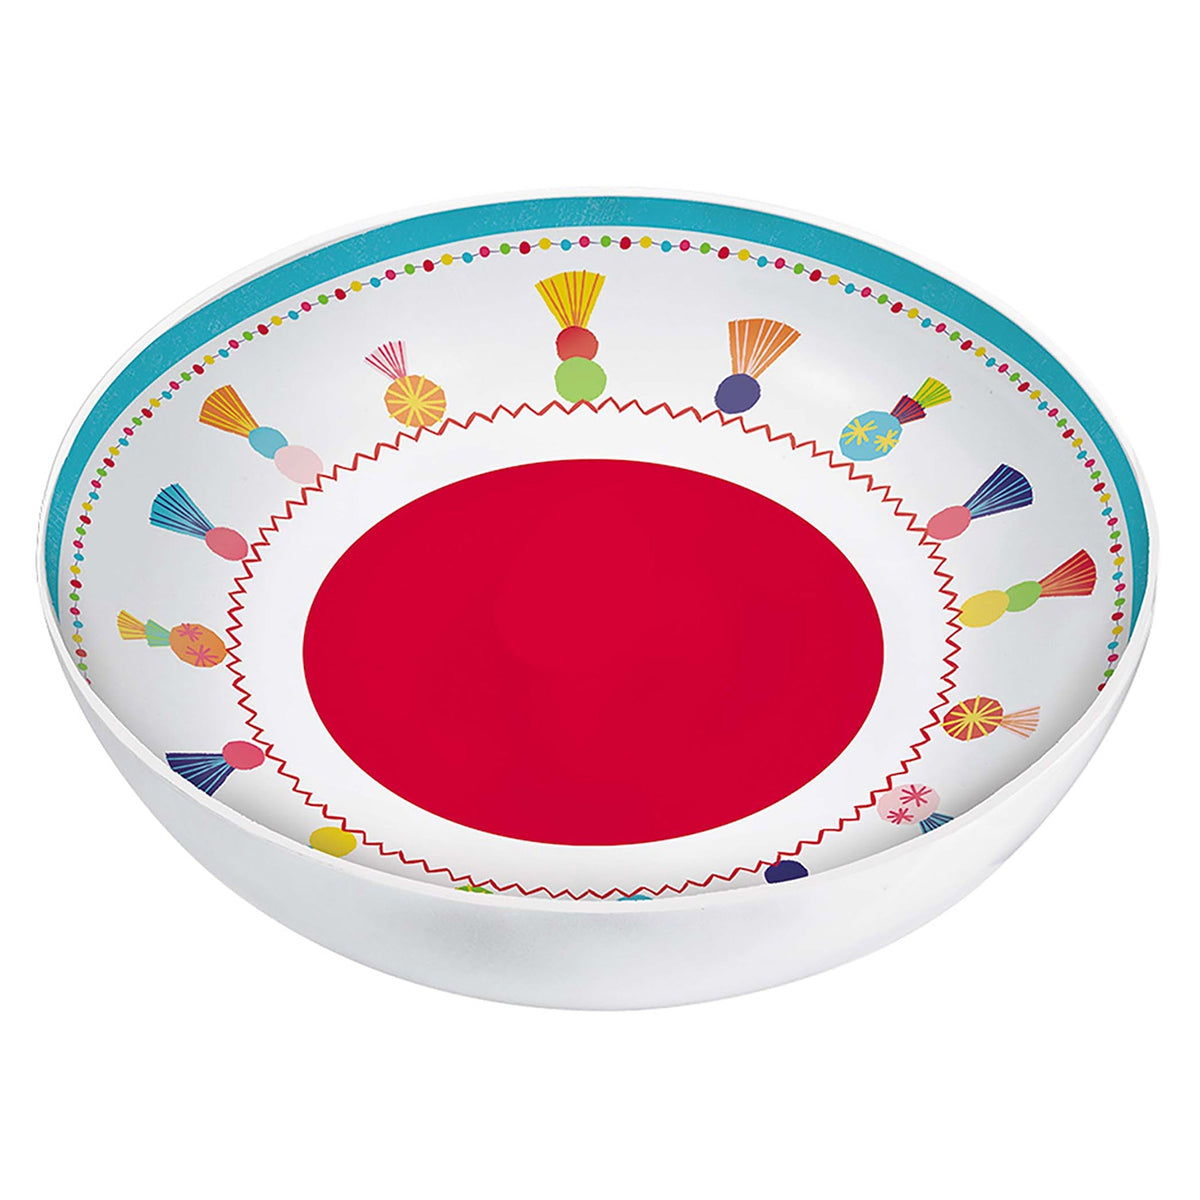 AMSCAN CA Theme Party Fiesta Round Bowl, 13 Inches, 1 Count